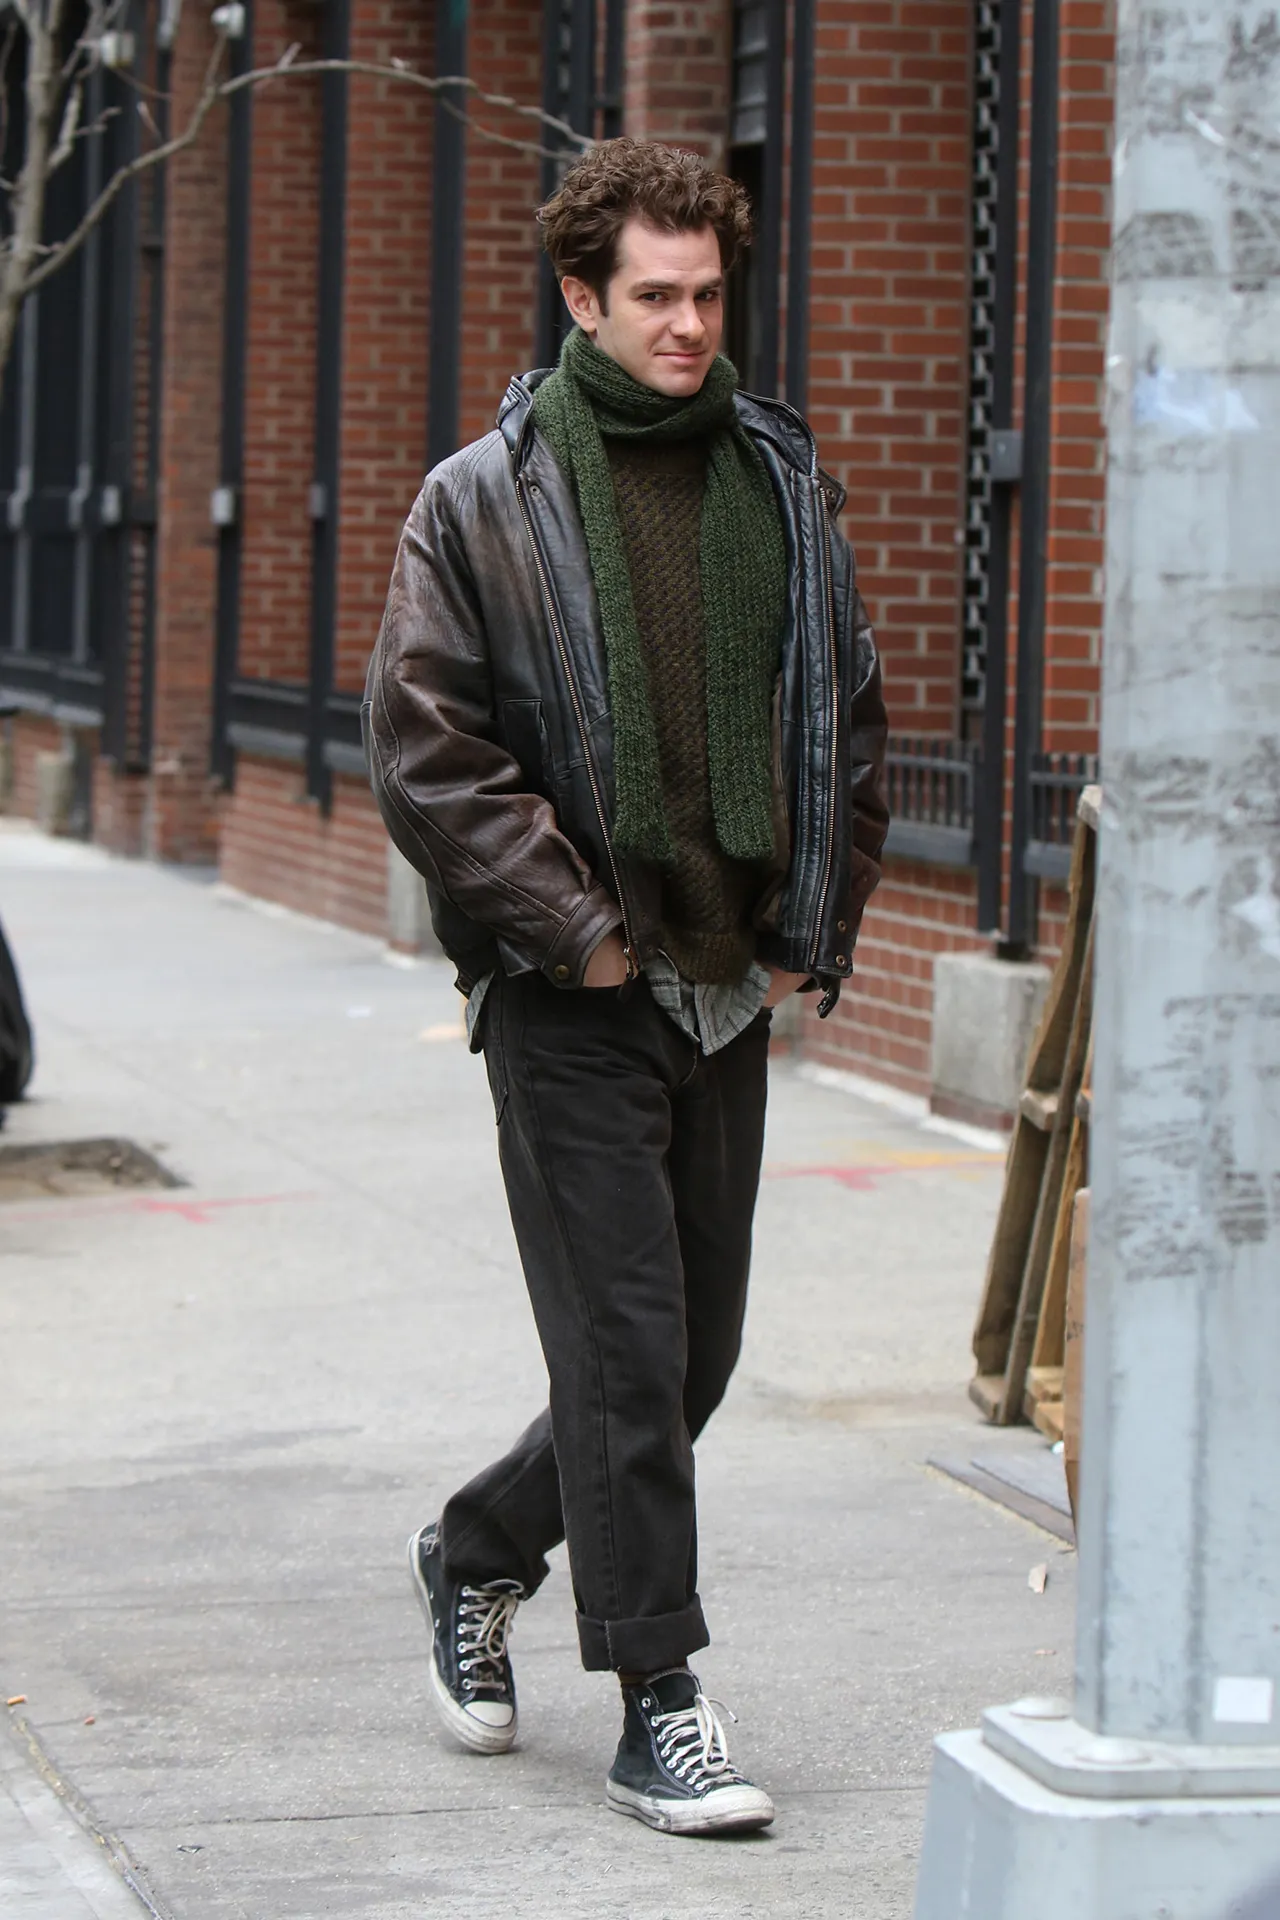 Andrew Garfield in a look inspired from the 1990s.